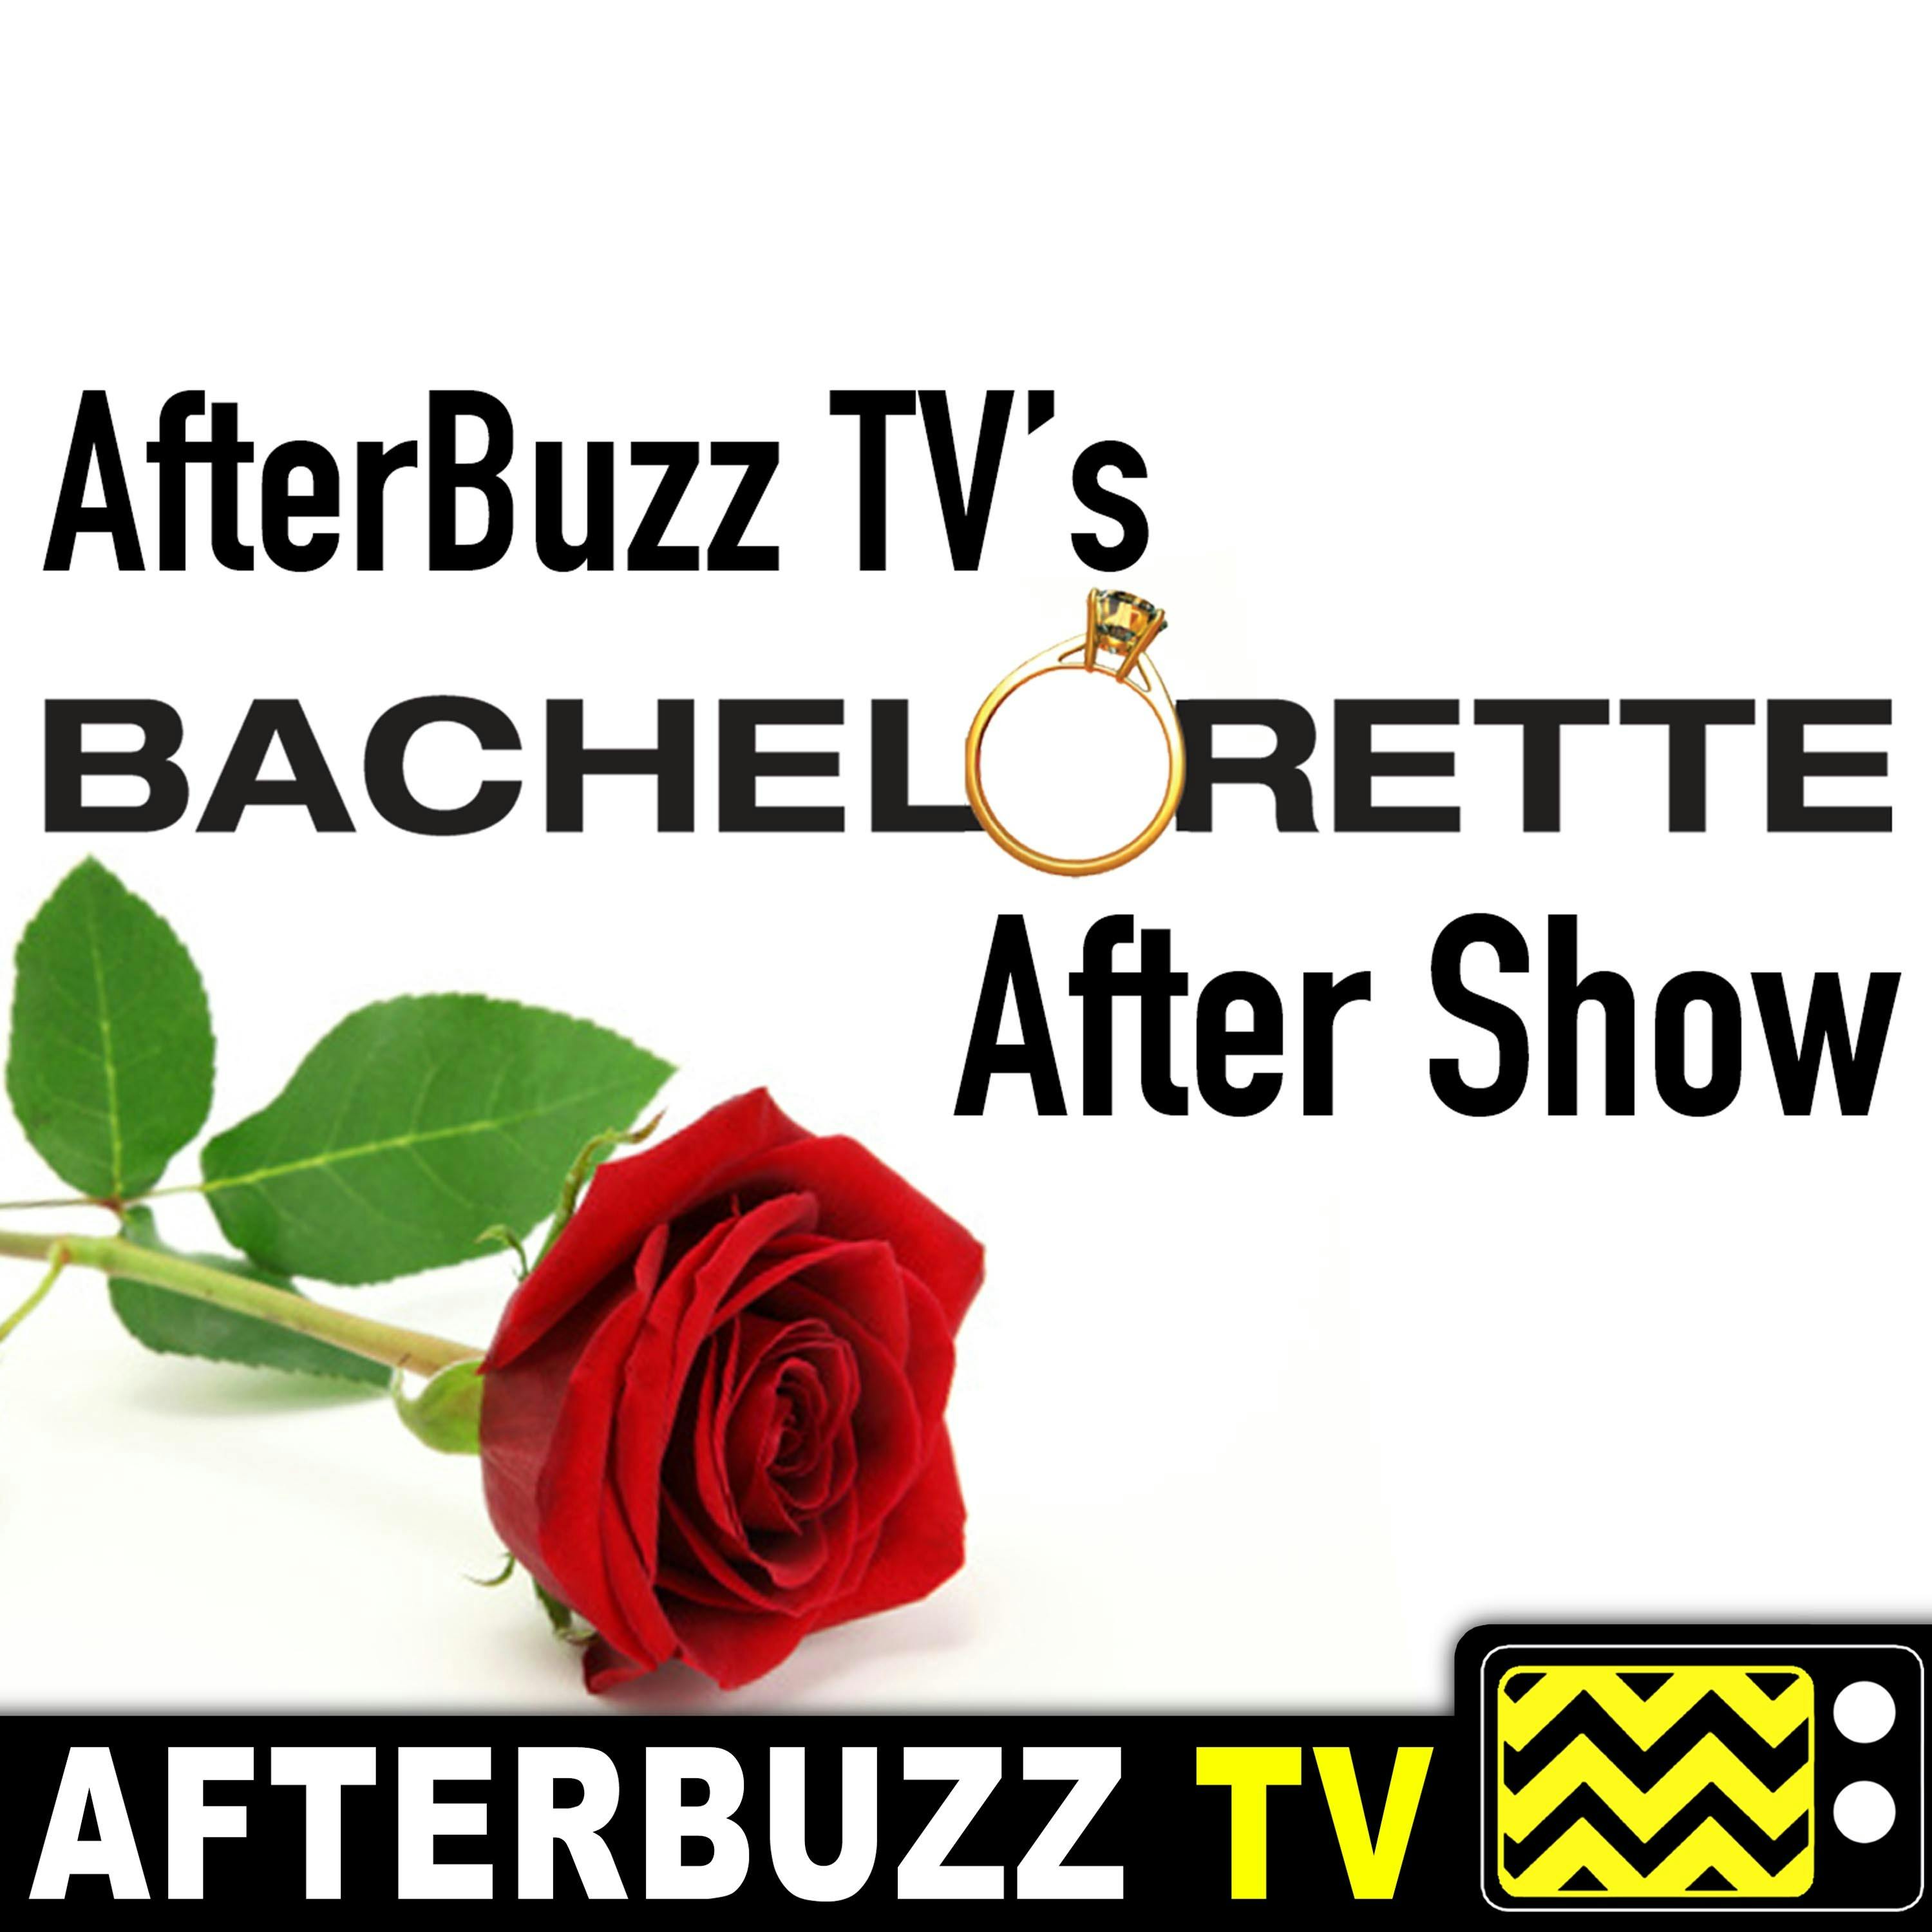 The Bachelorette S:12 | Episode 1 | AfterBuzz TV AfterShow